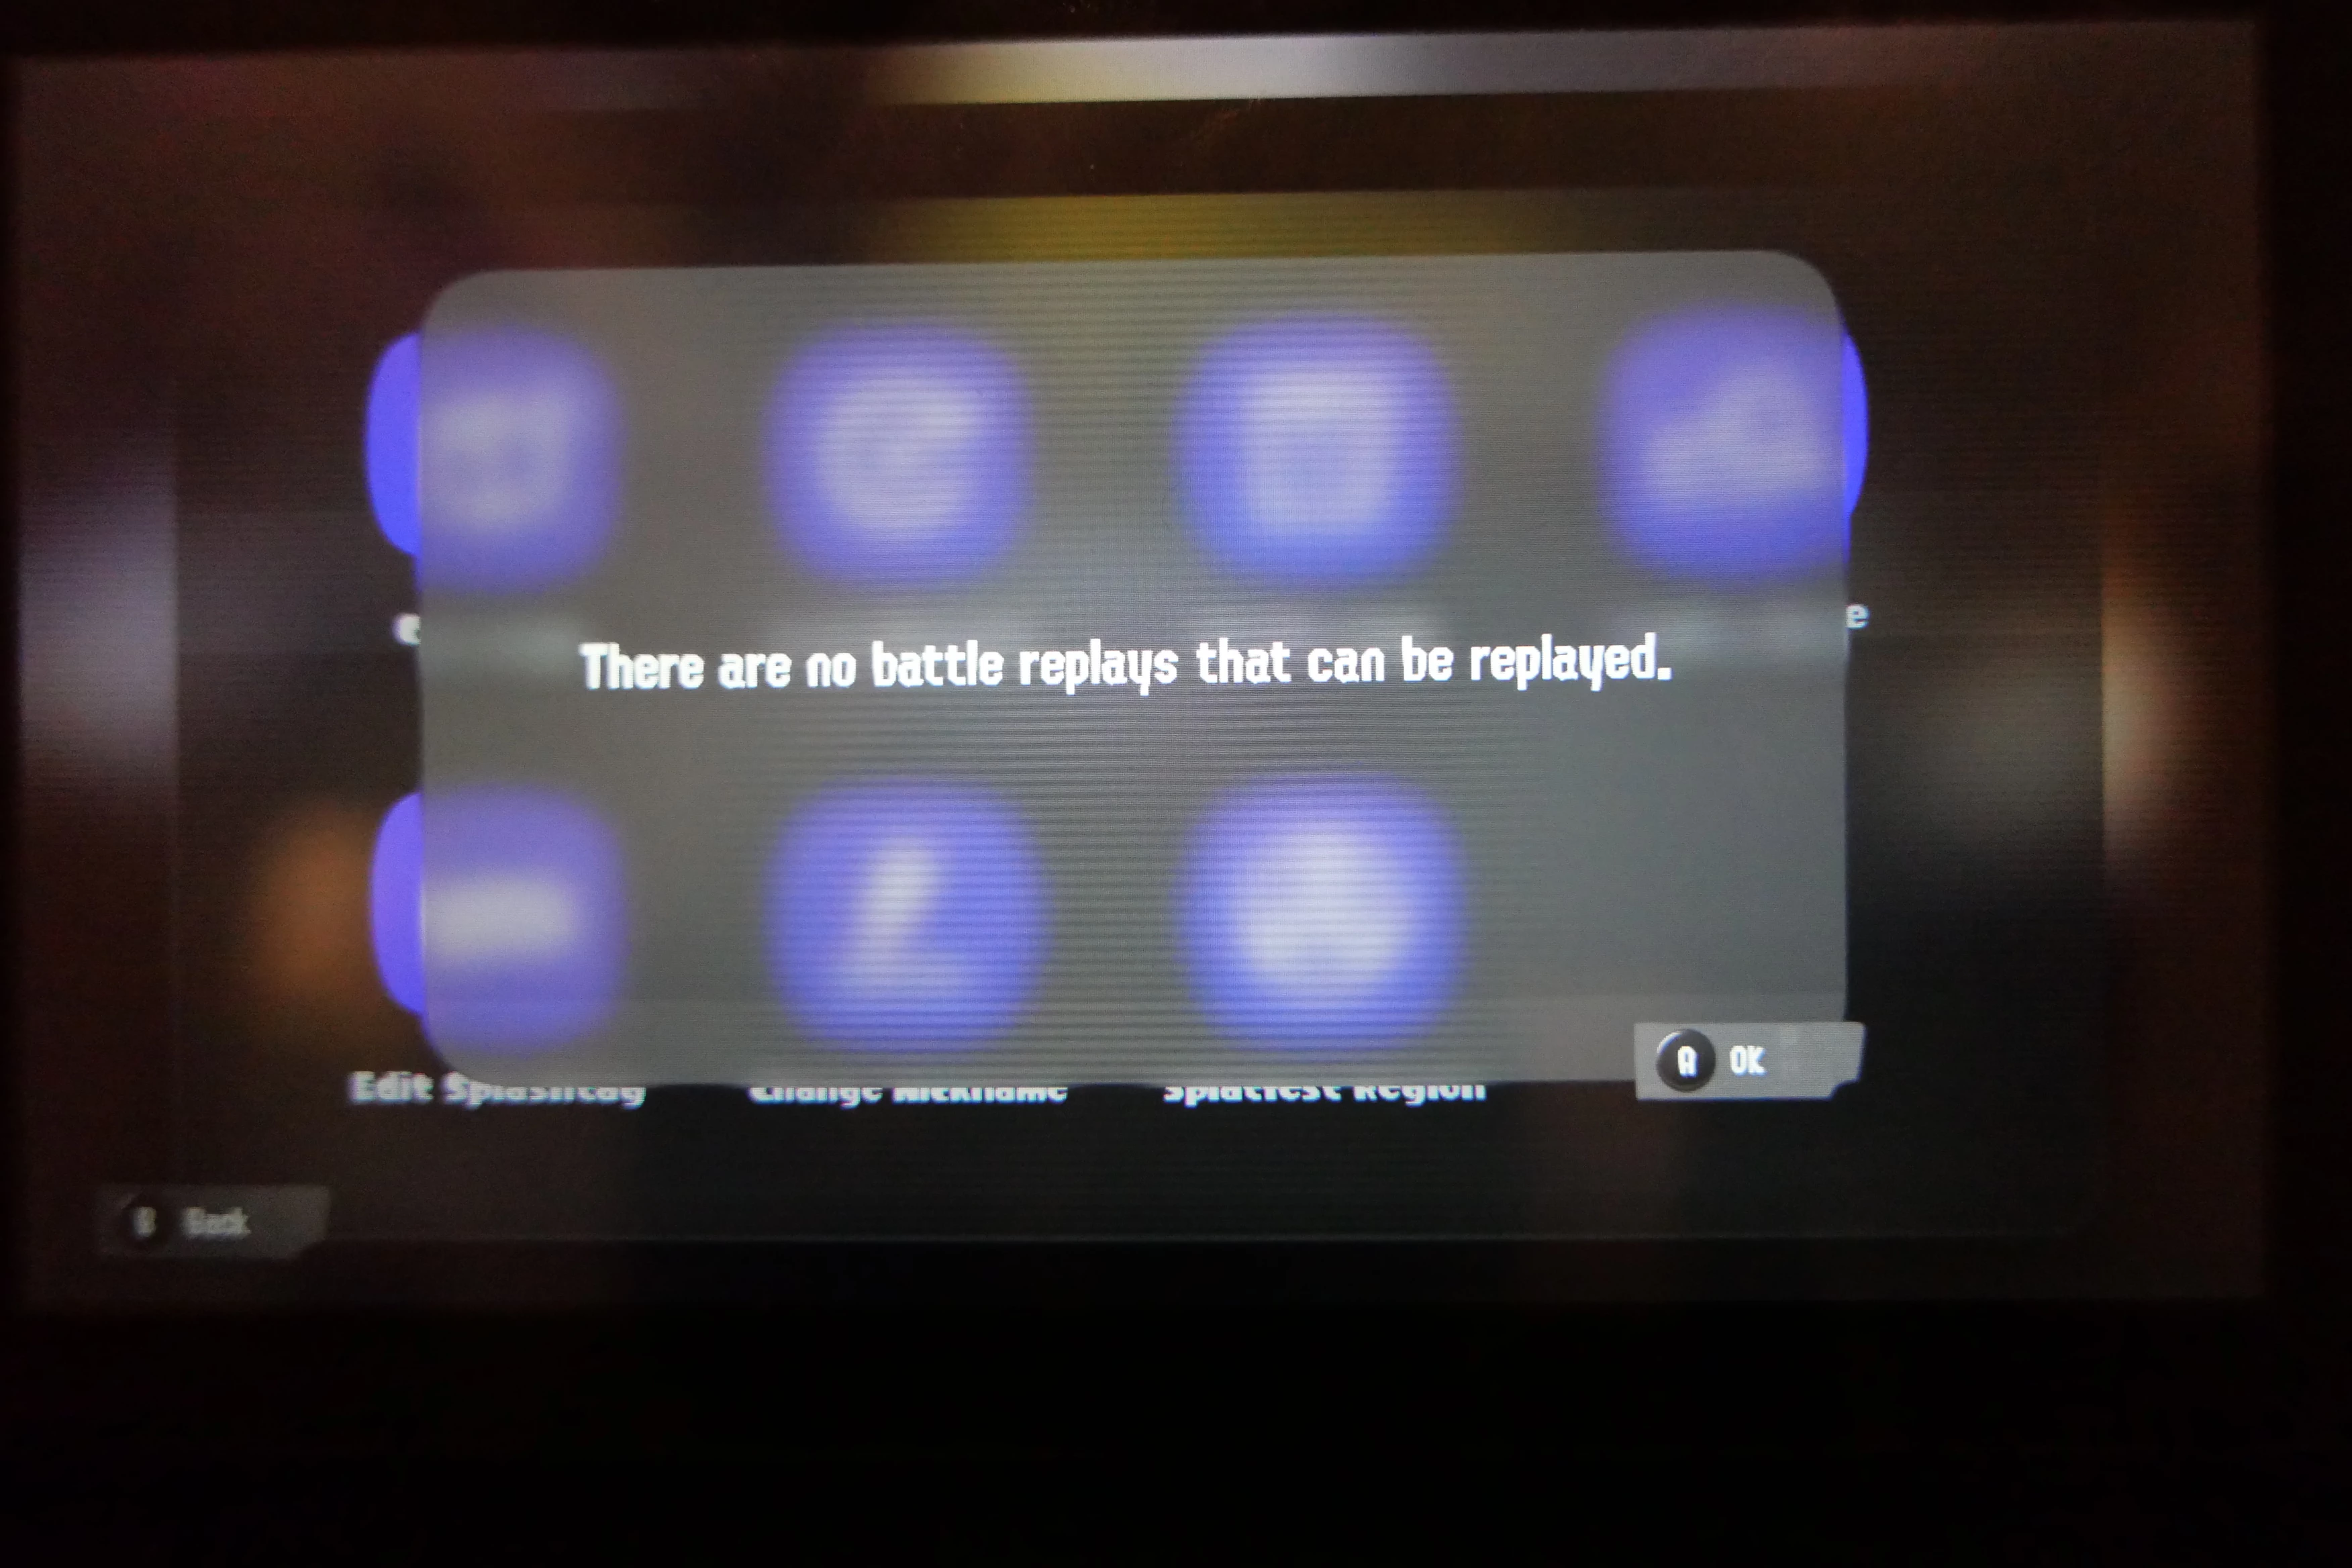 Photo of a Switch screen displaying the message There are no battle replays that can be replayed.